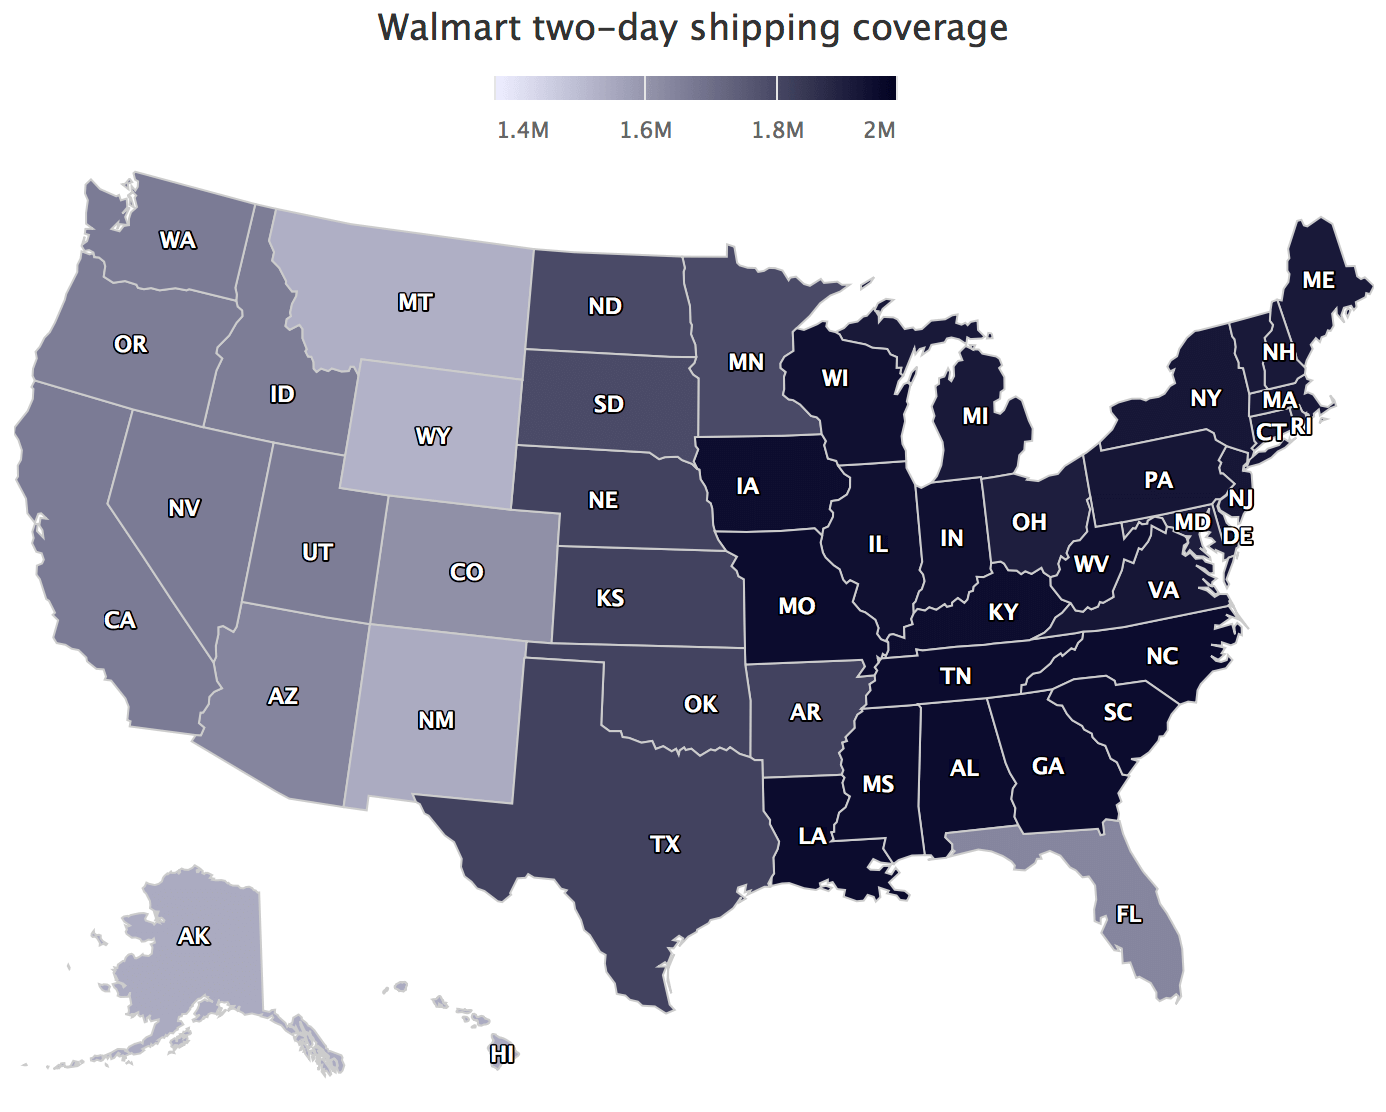 Walmart two-day shipping coverage